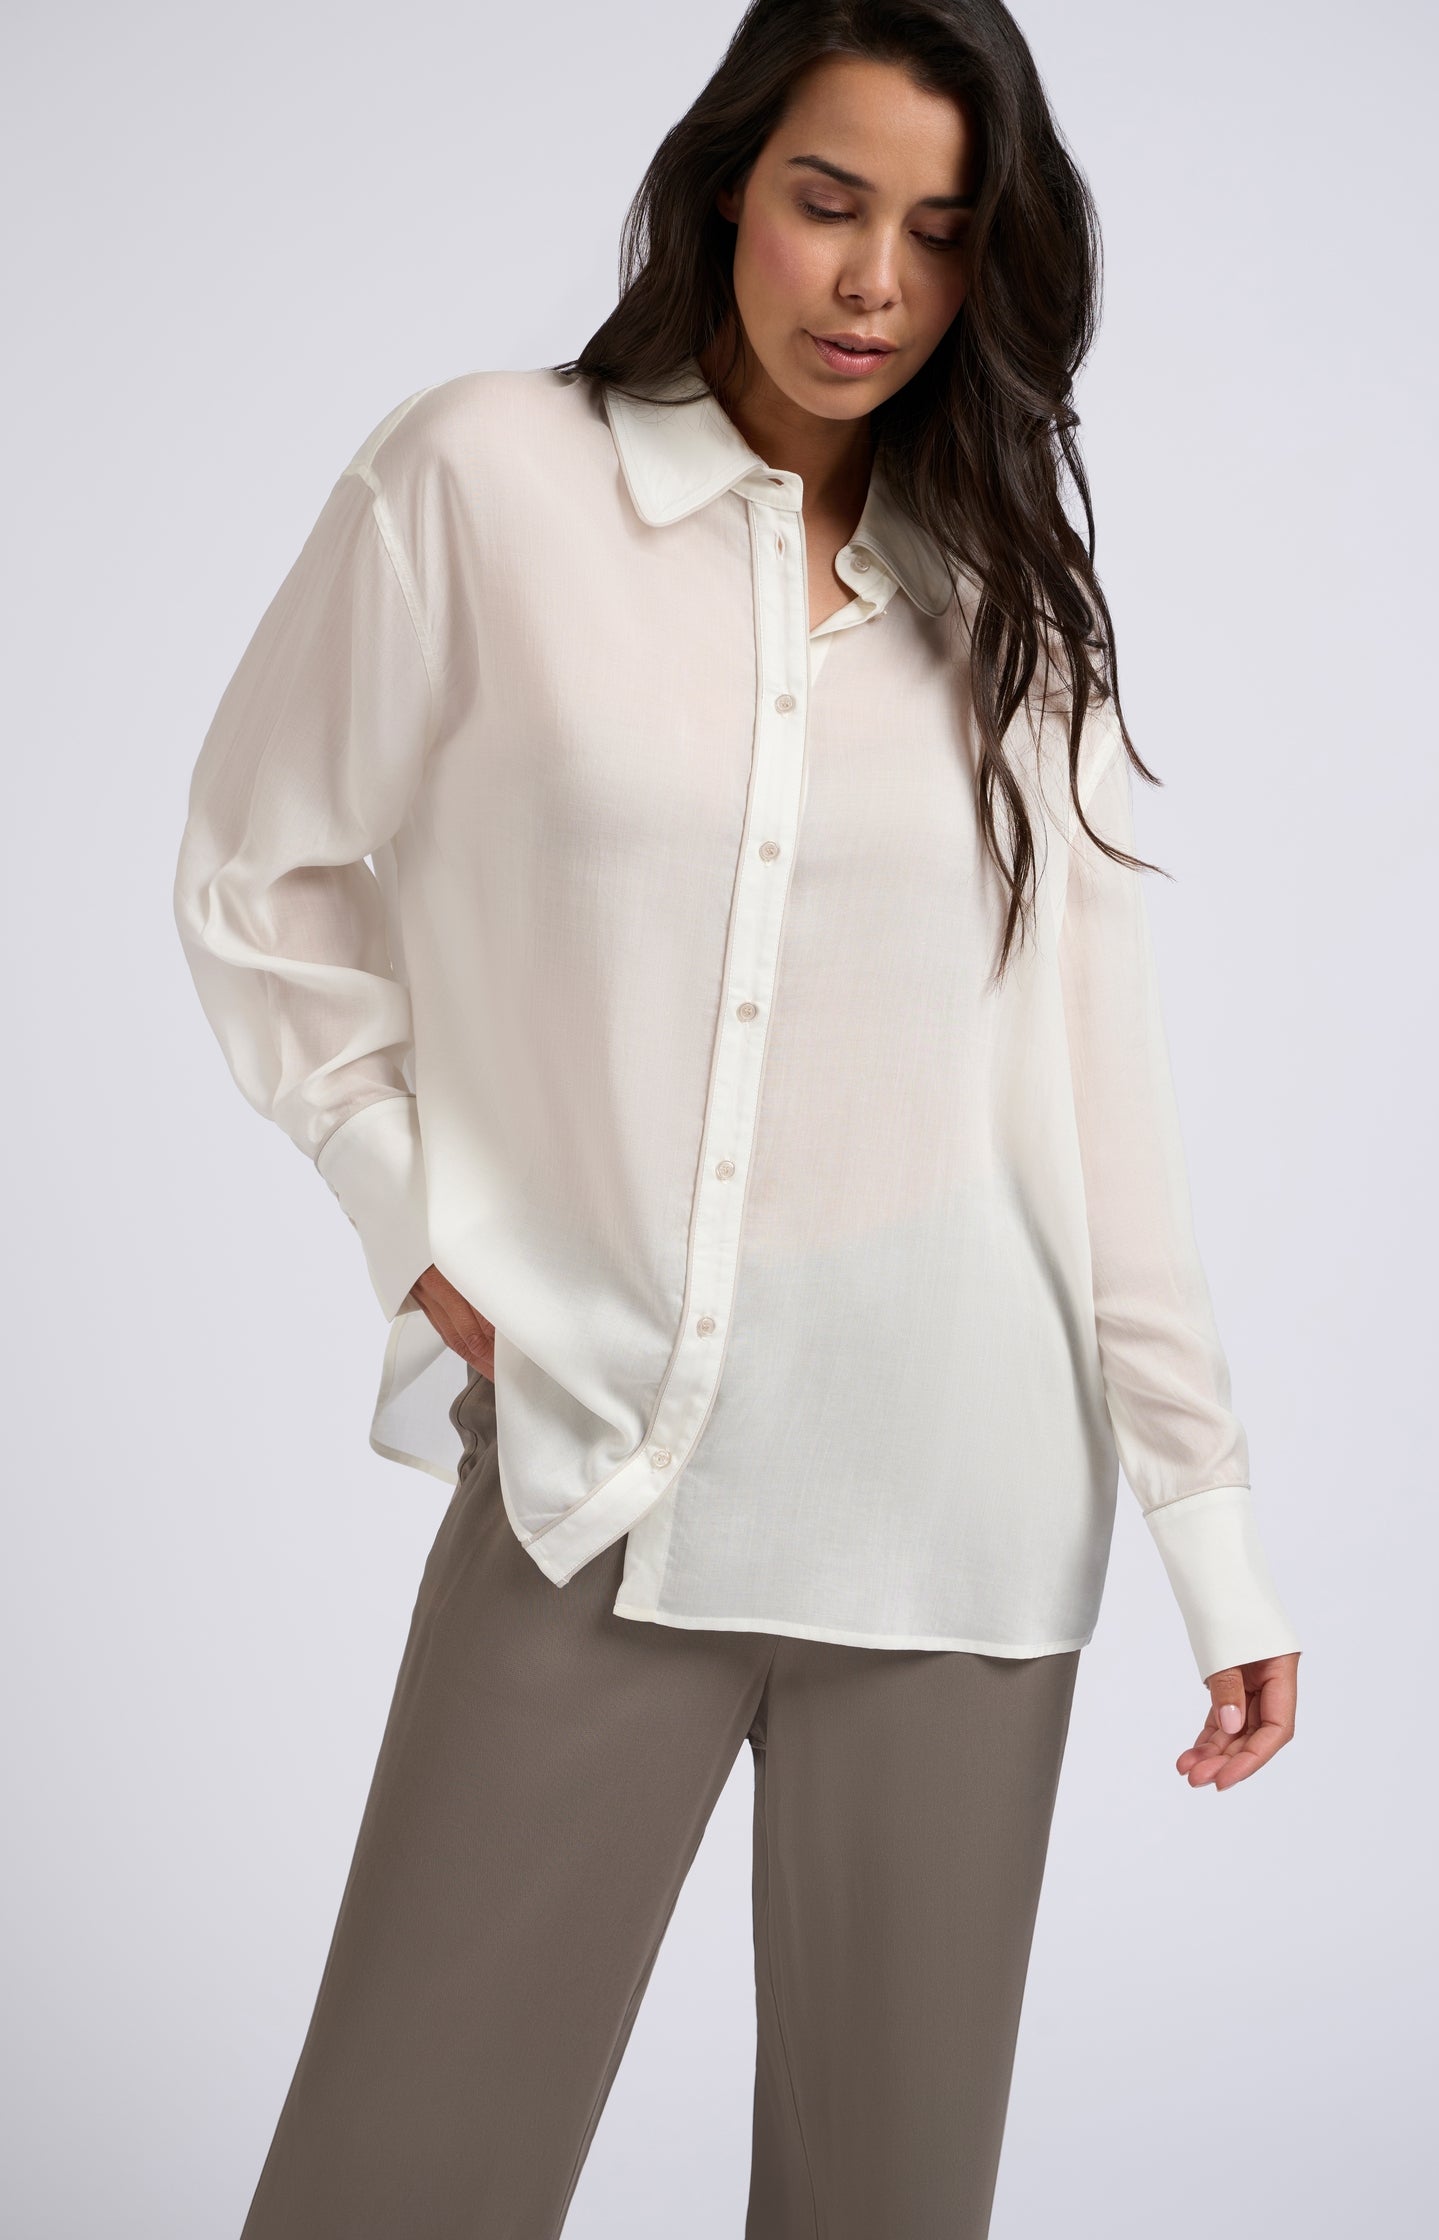 Long-sleeve blouse with contrast details - Type: lookbook